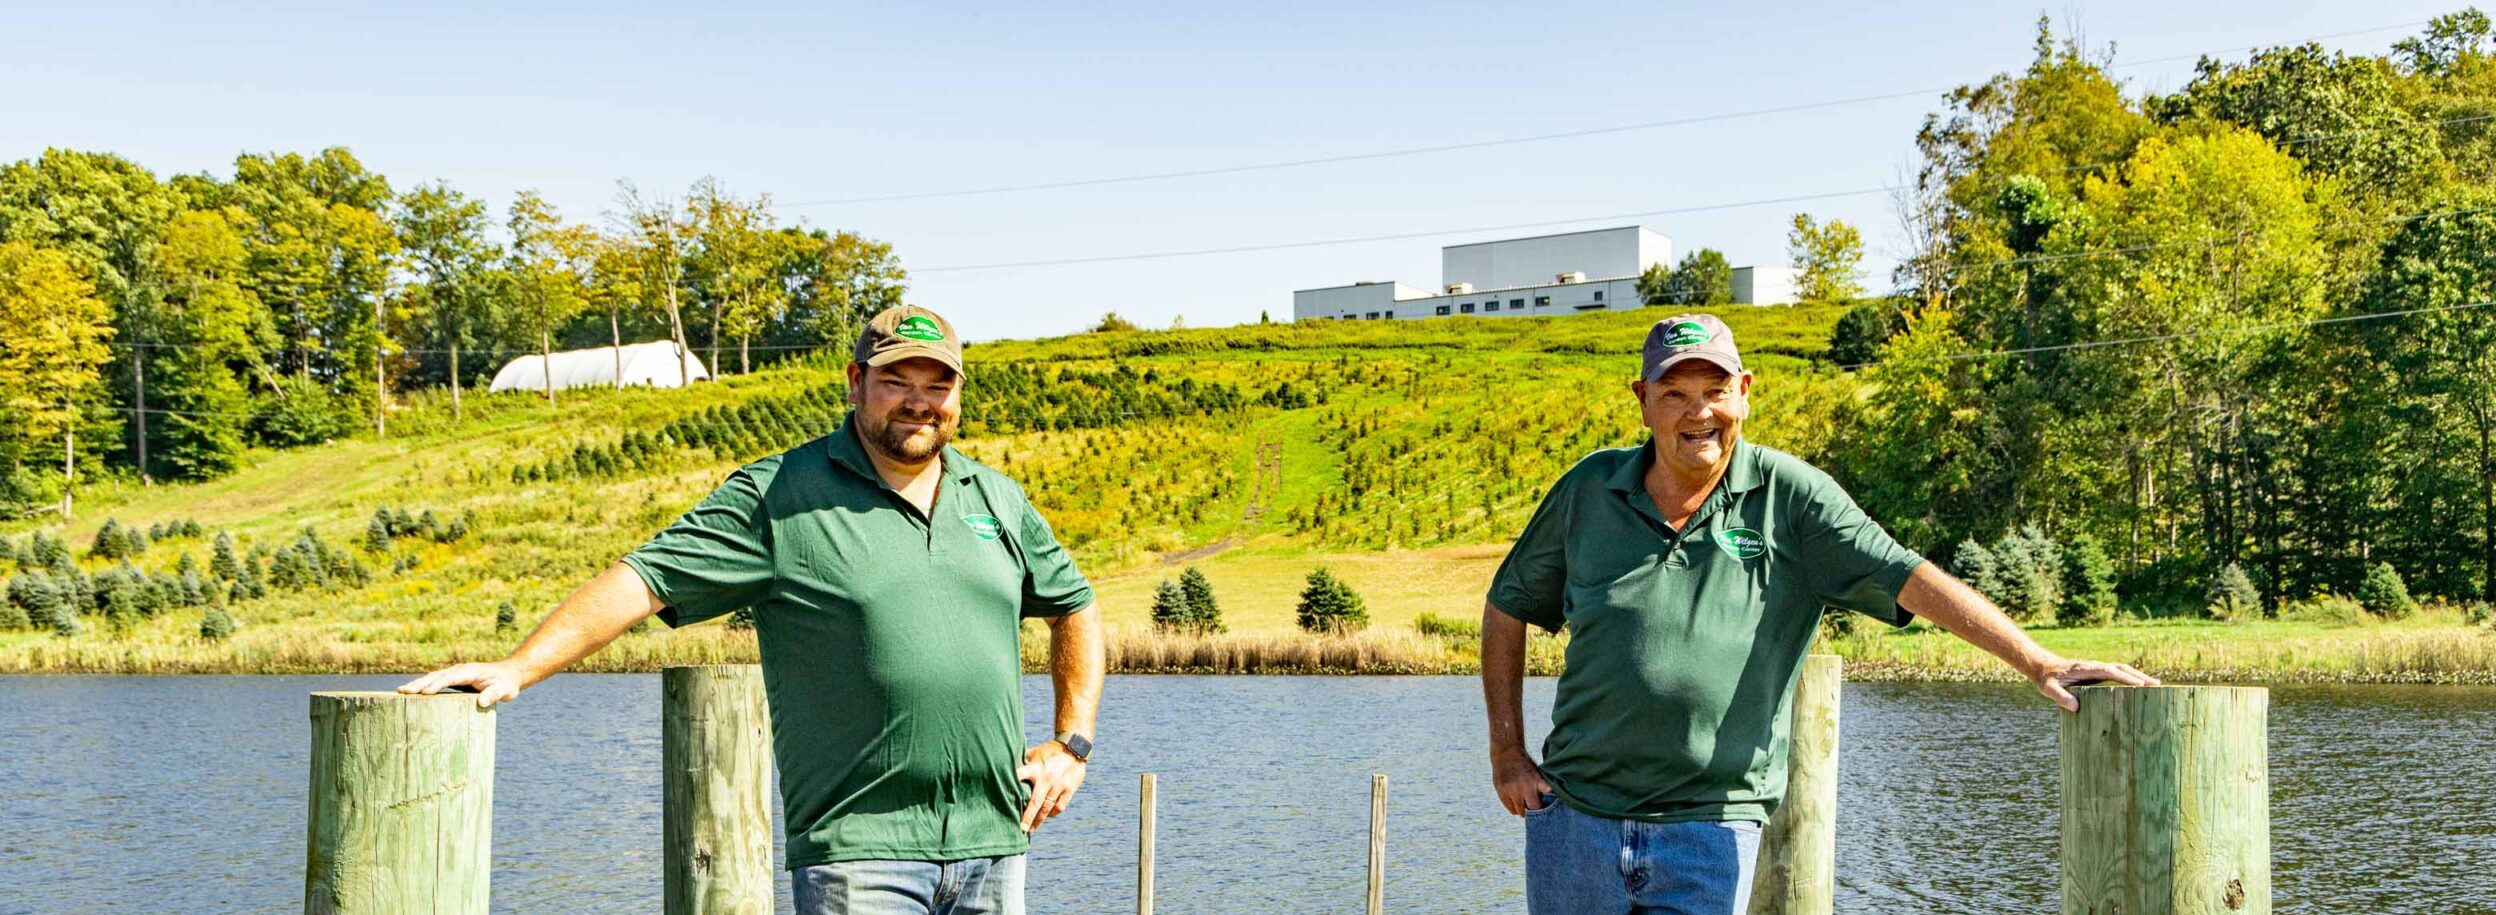 Van Wilgen's owners standing on a dock next to a pond.